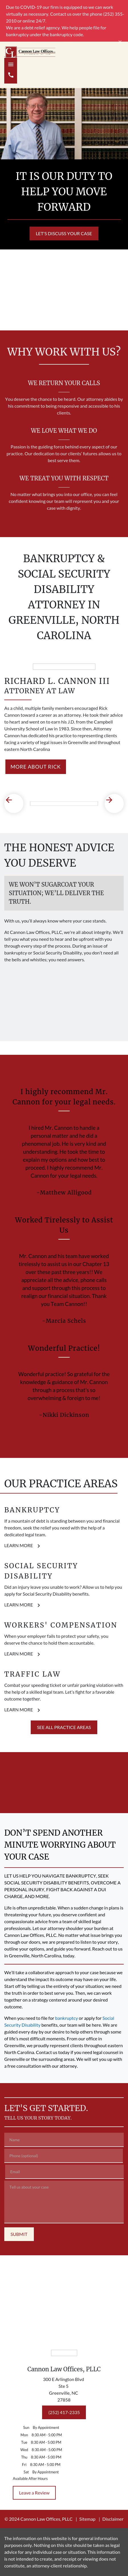 Cannon Law Offices, PLLC - Greenville NC Lawyers